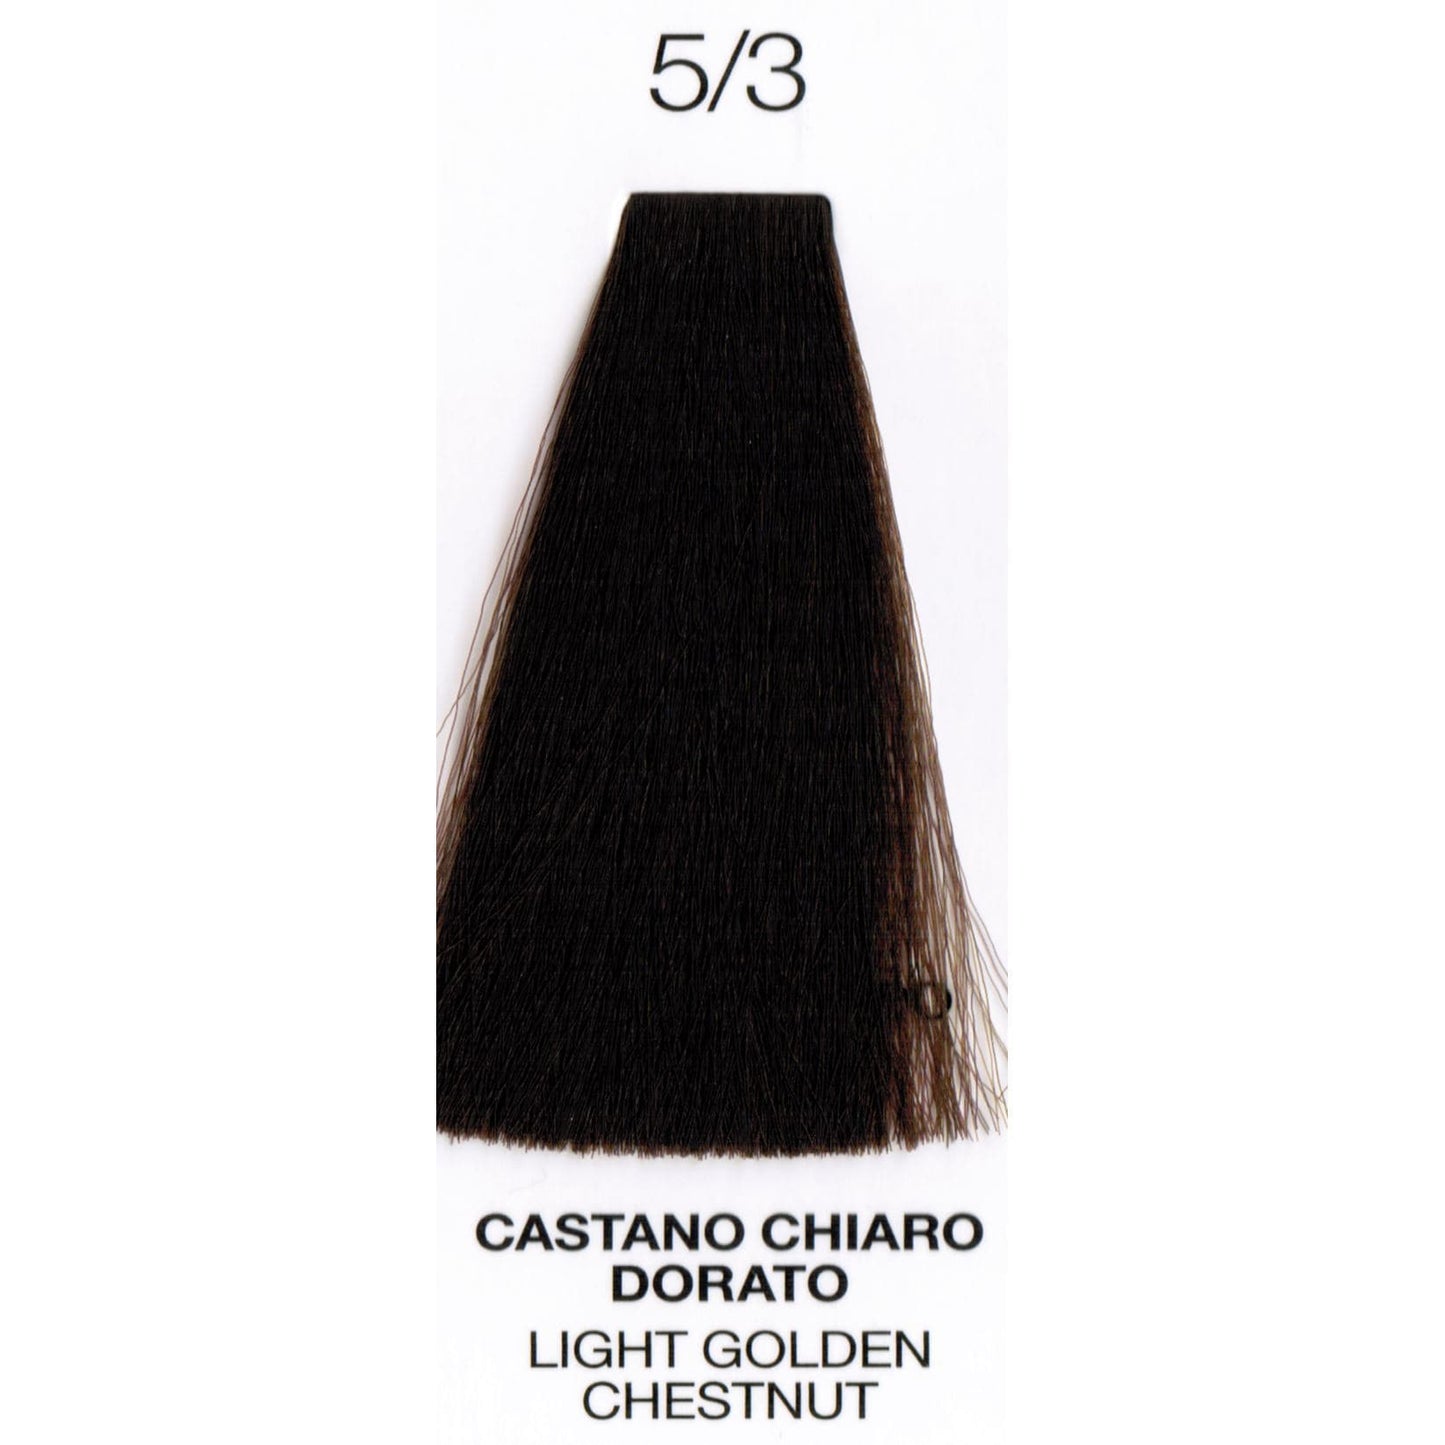 5/3 Light Golden Chestnut | Ammonia-Free Permanent Hair Color | Purity | OYSTER - SH Salons